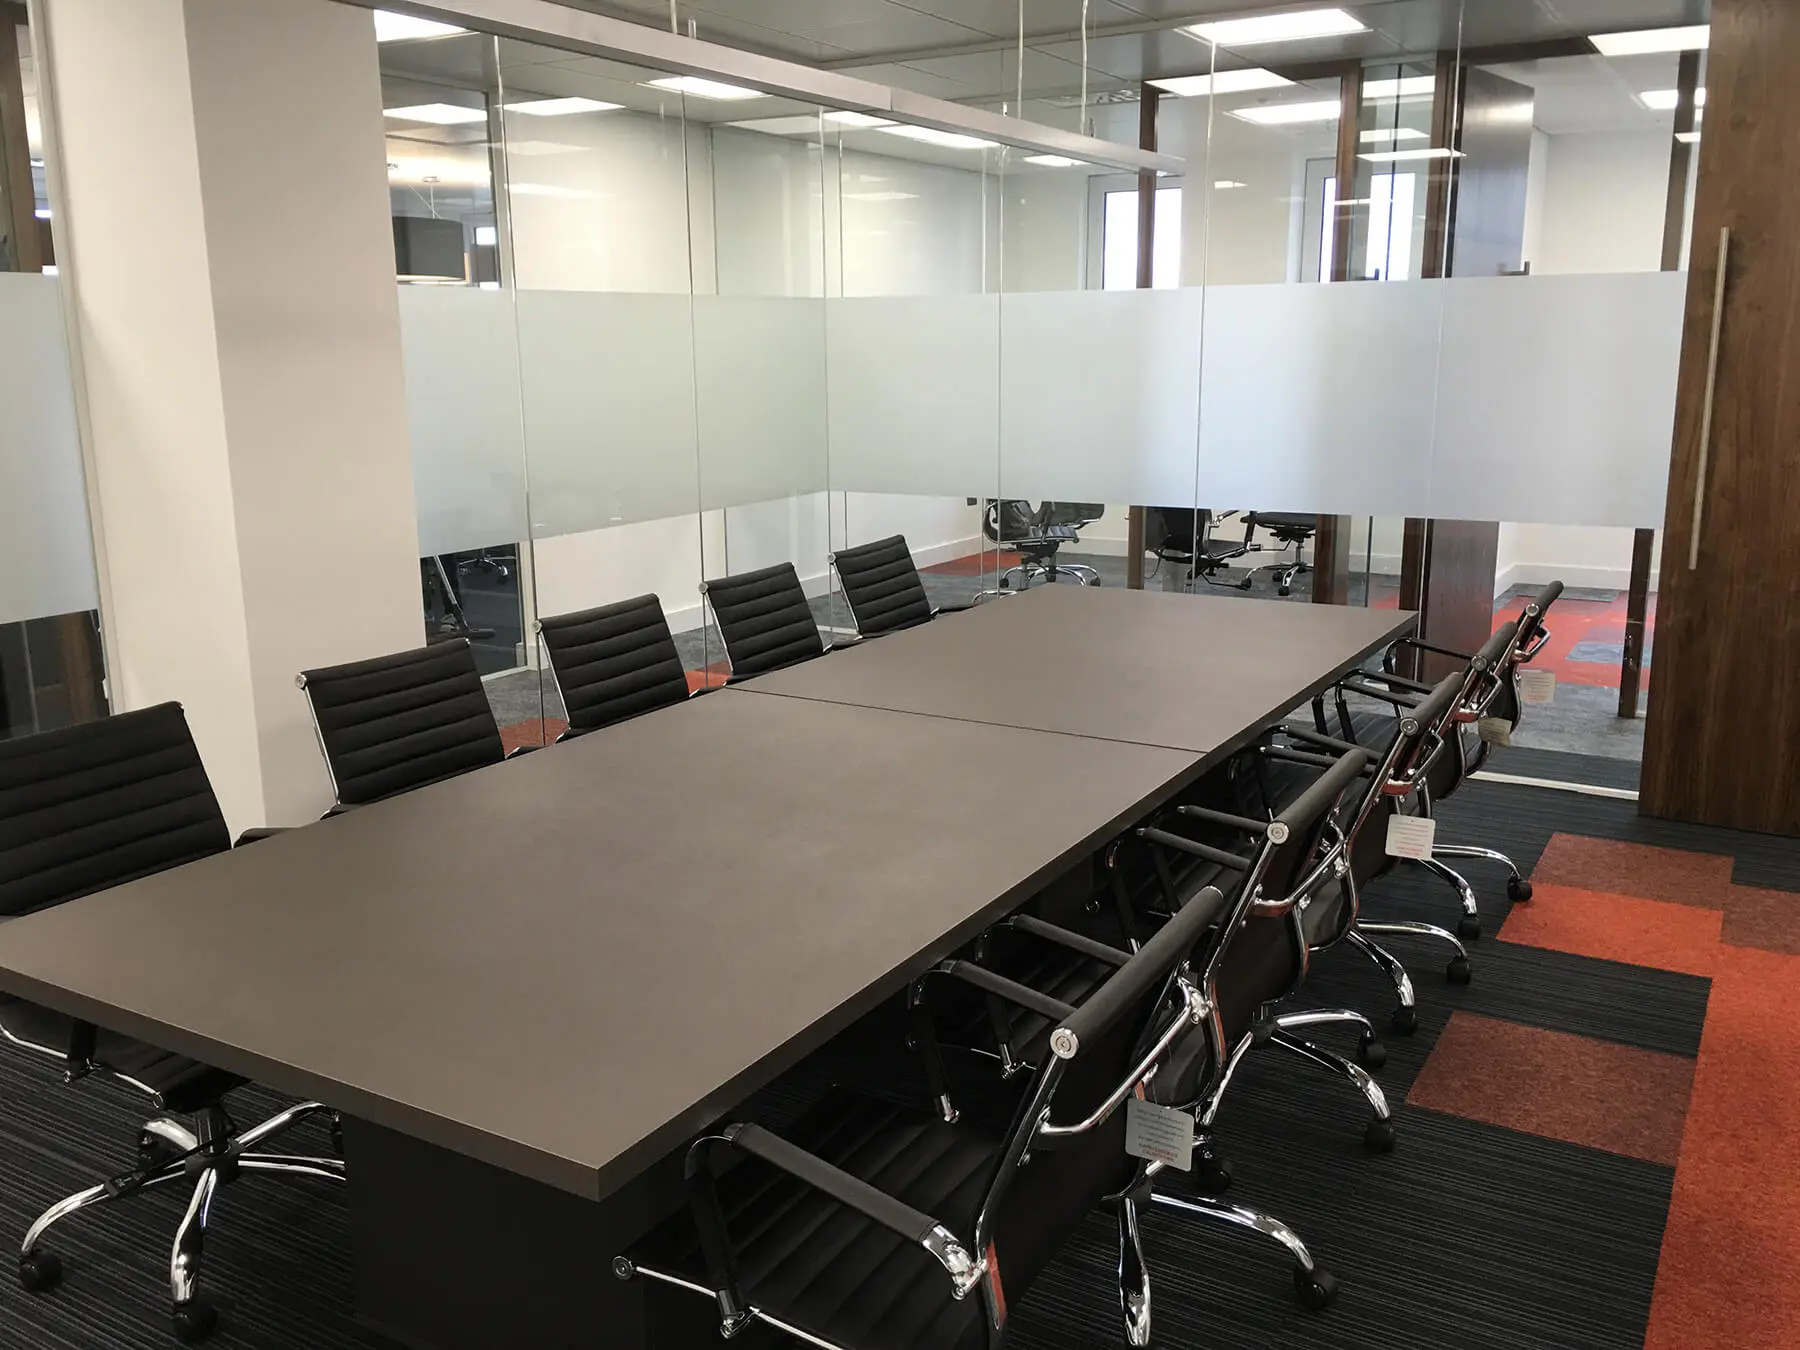 Meeting room with several black chairs and table